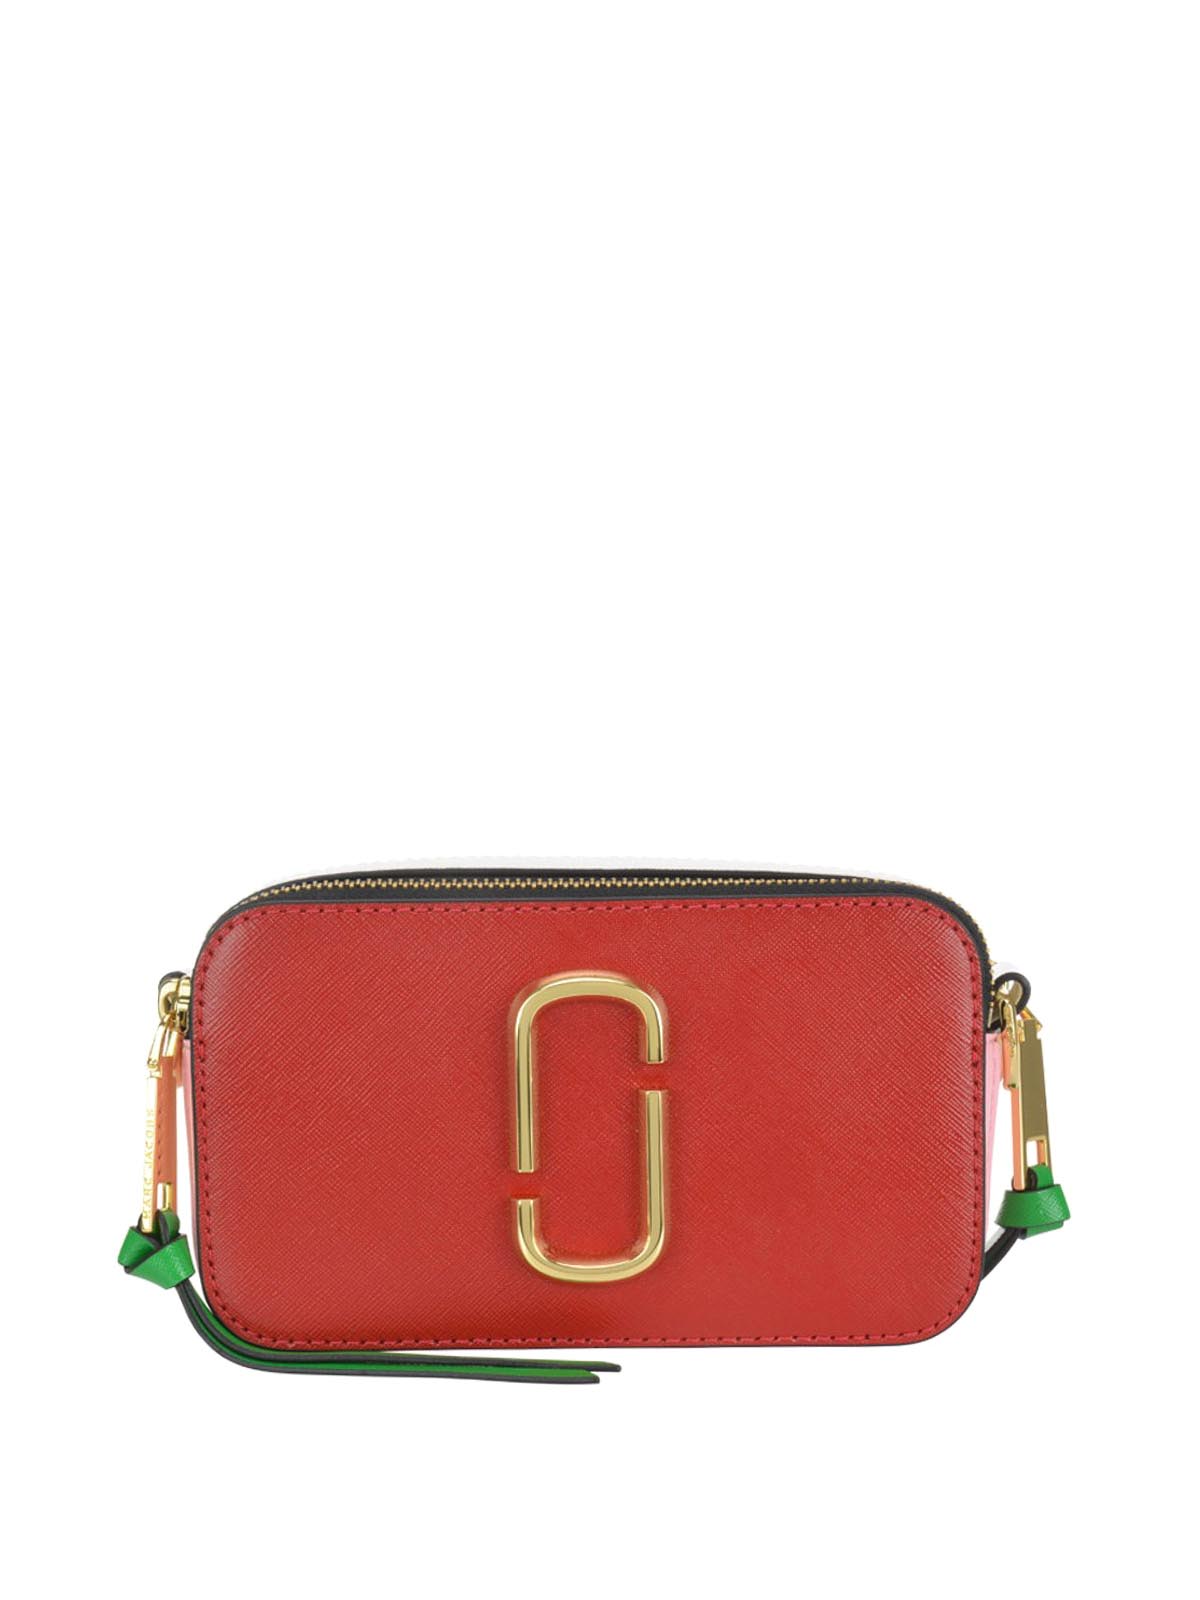 Cross body bags Marc Jacobs - Snapshot Small Camera red cross body bag ...